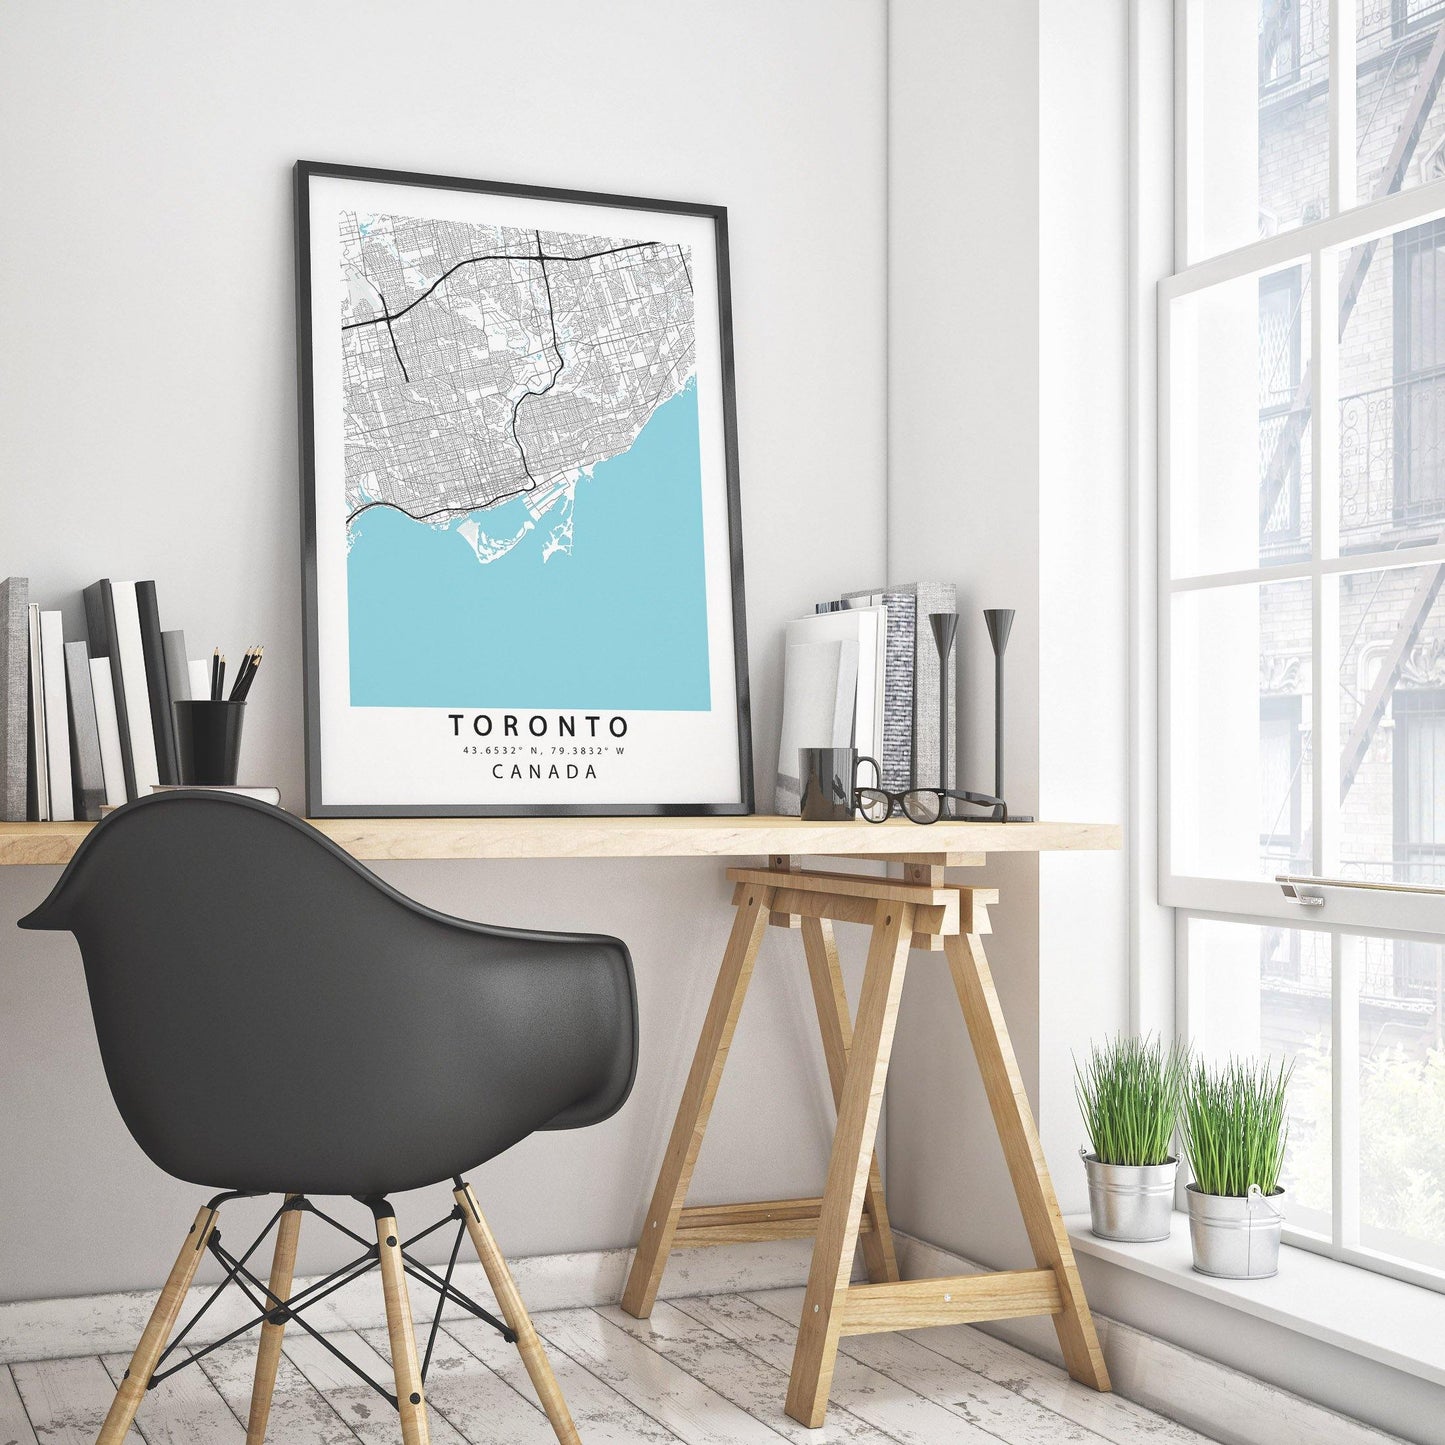 This Toronto Ontario Map Print is the perfect way to explore the city. Detailed and accurate, it showcases roads, neighborhoods, parks, and other landmarks. Its high-quality artistry is sure to make a statement in any home or office.